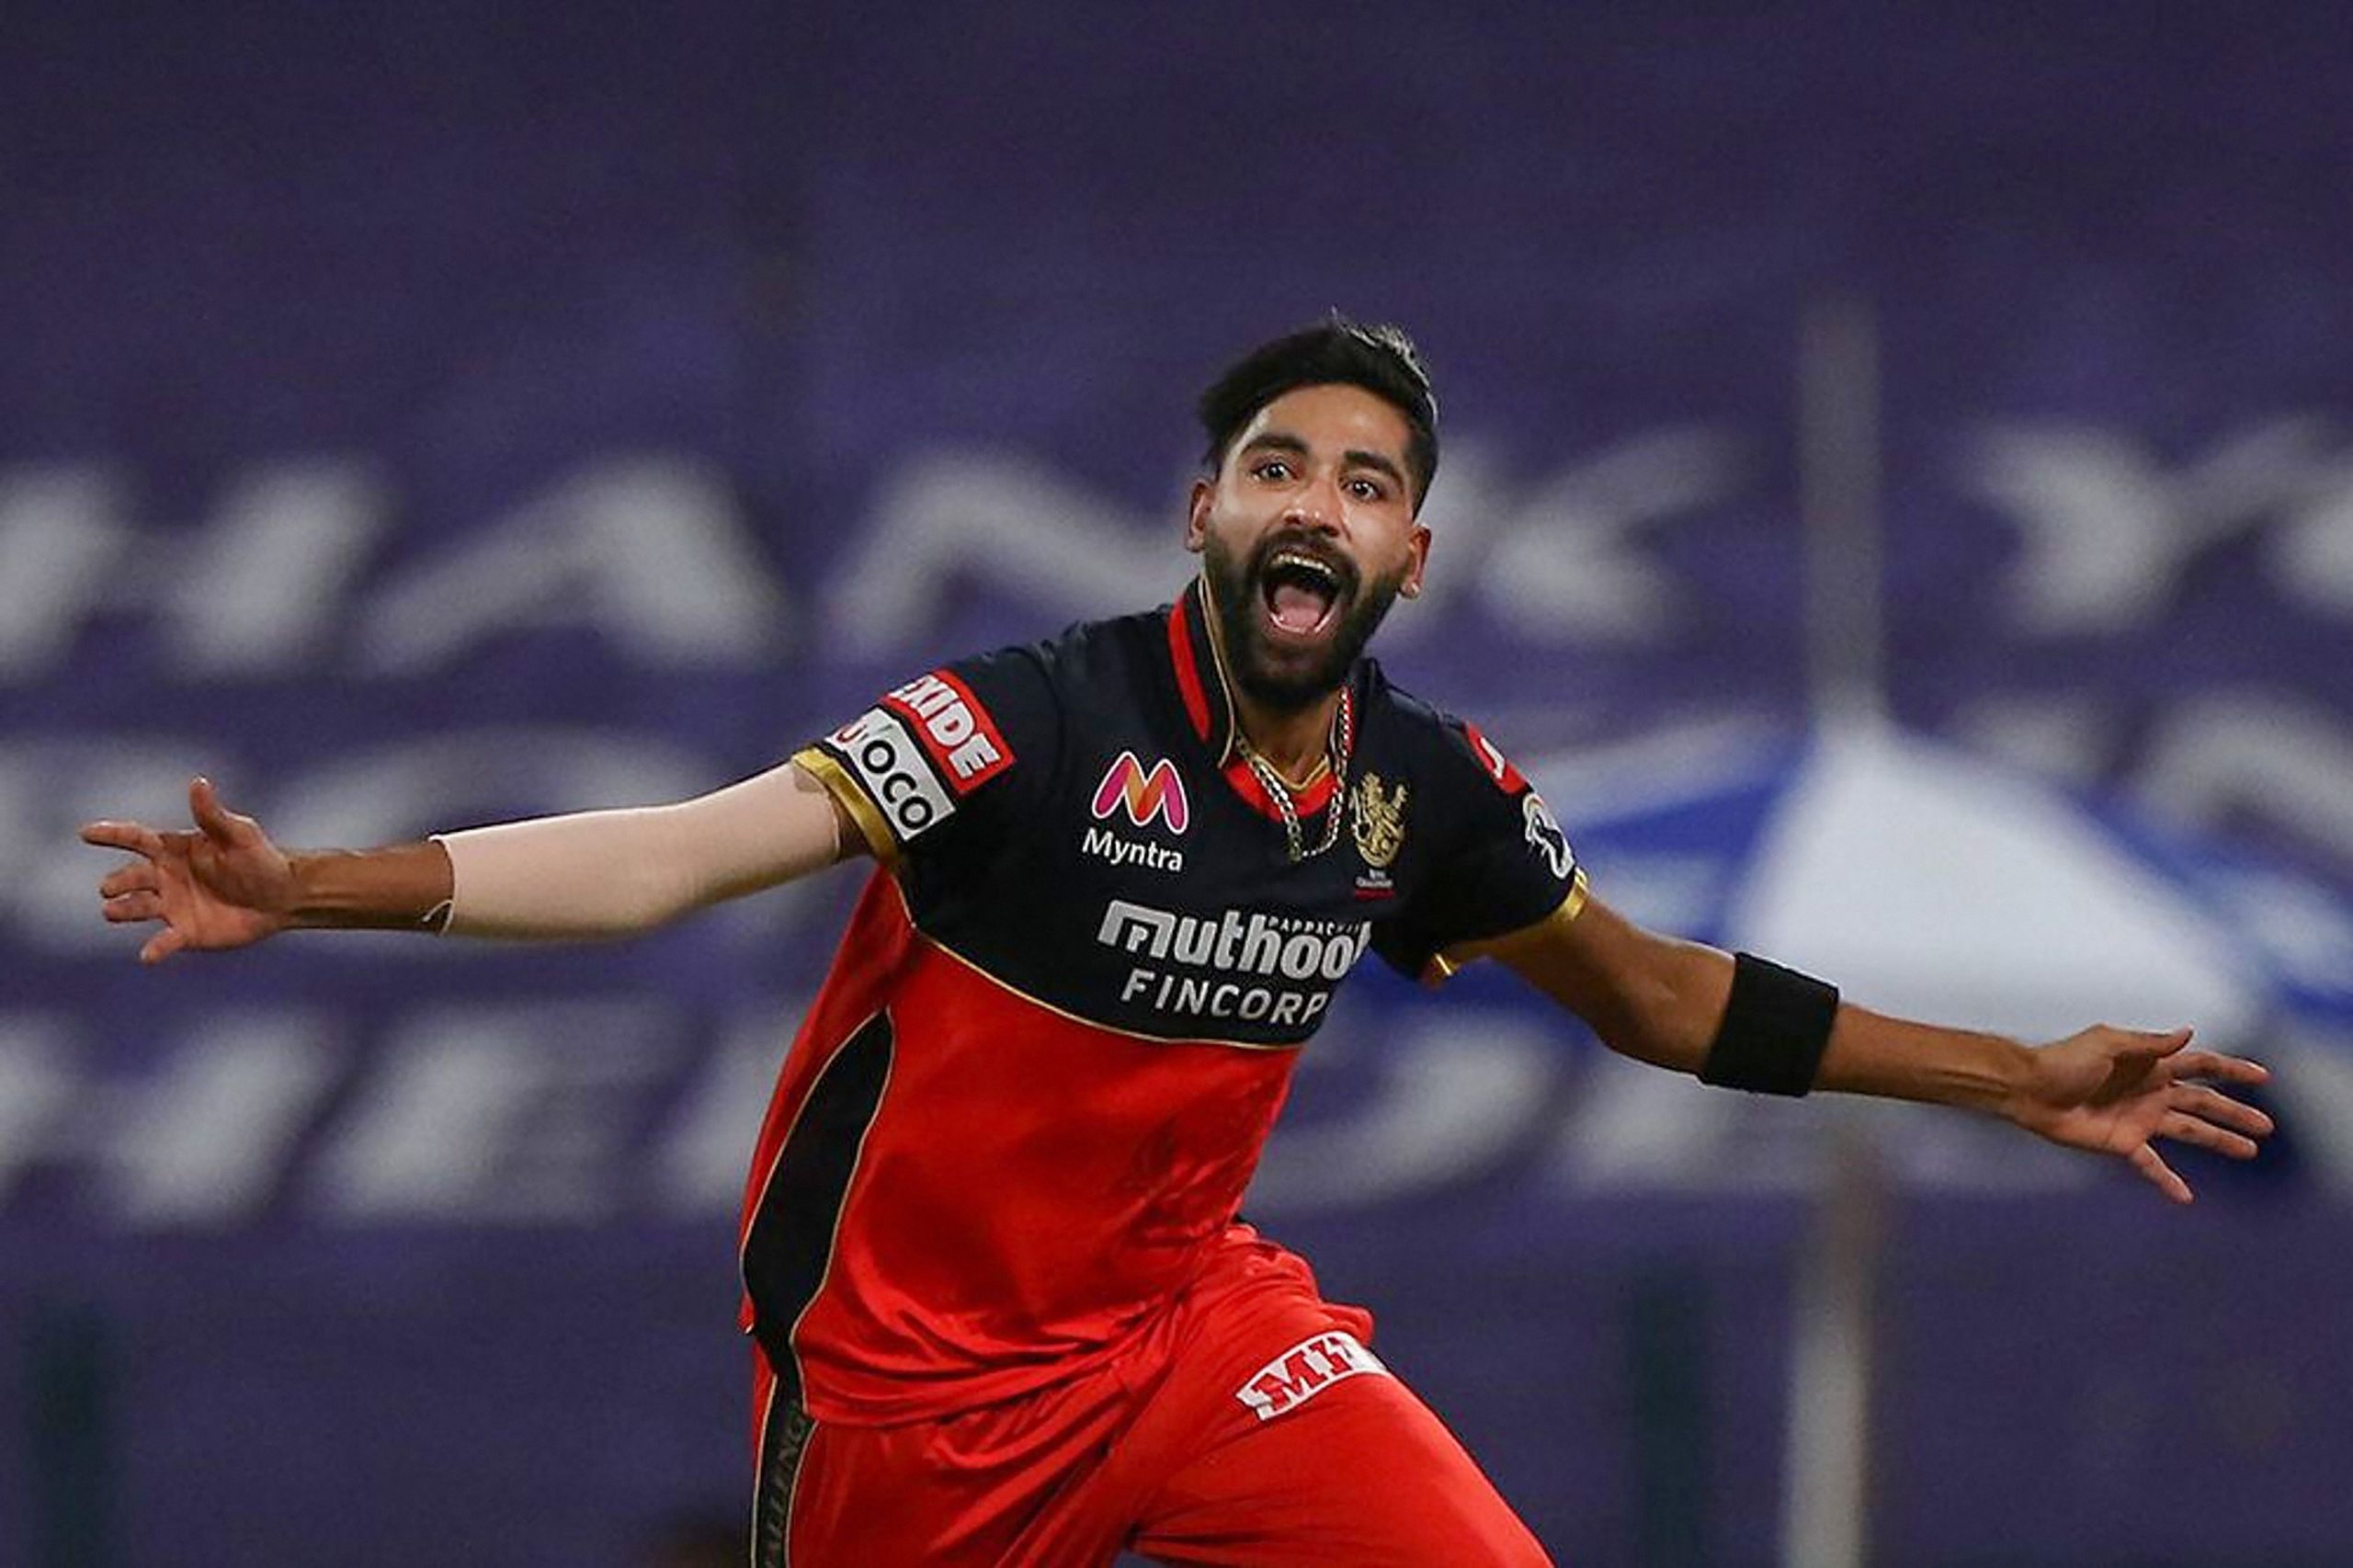 ‘Virat bhai said that tough situation will make me stronger’: Cricketer Mohammed Siraj